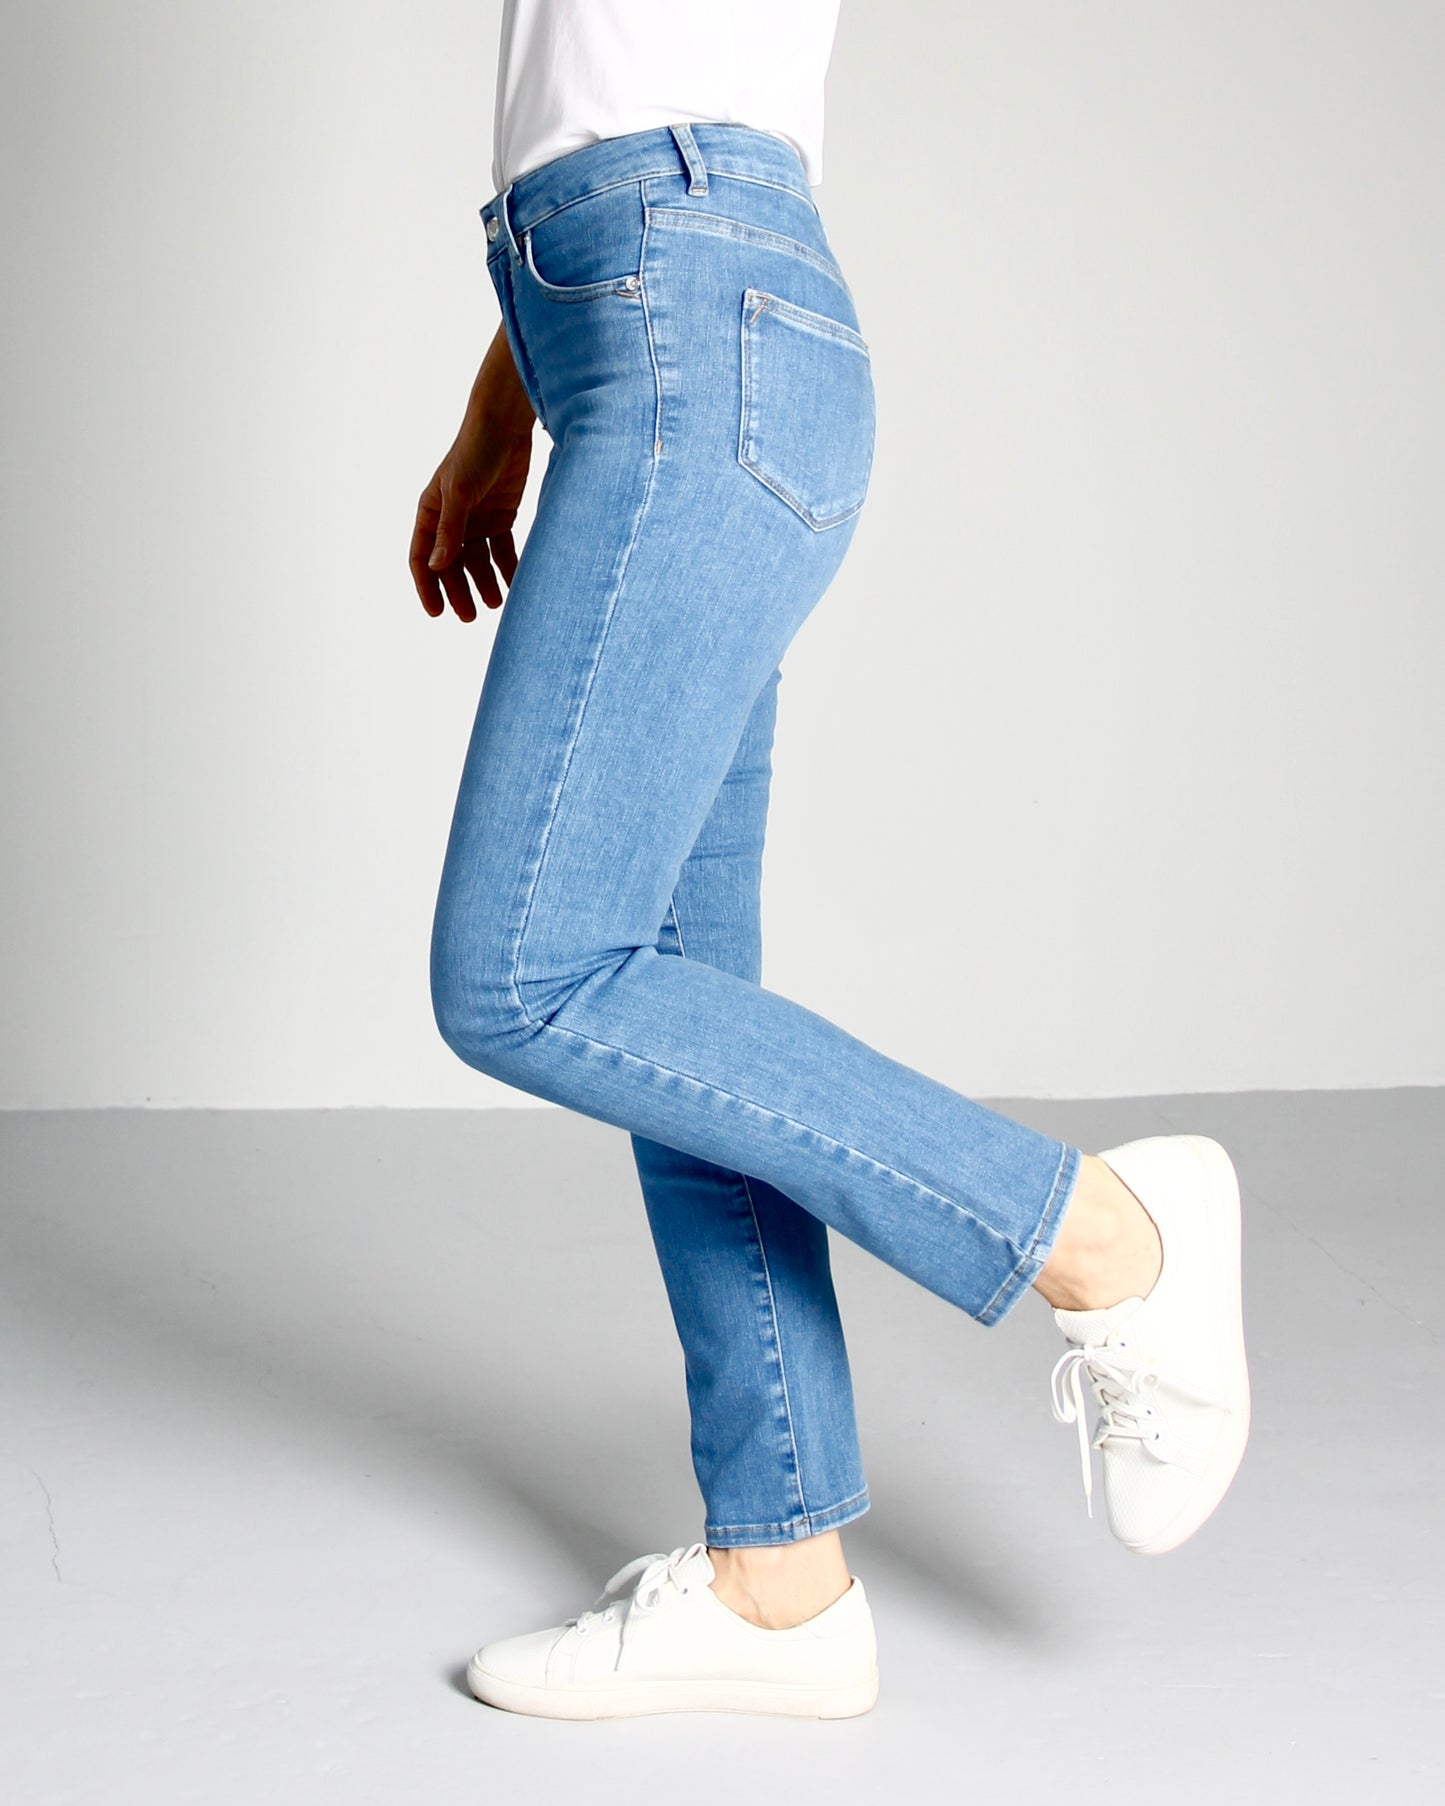 NY - Emma Riviera blue Jeans - Dame - Tailored  - High waist - Stretchy